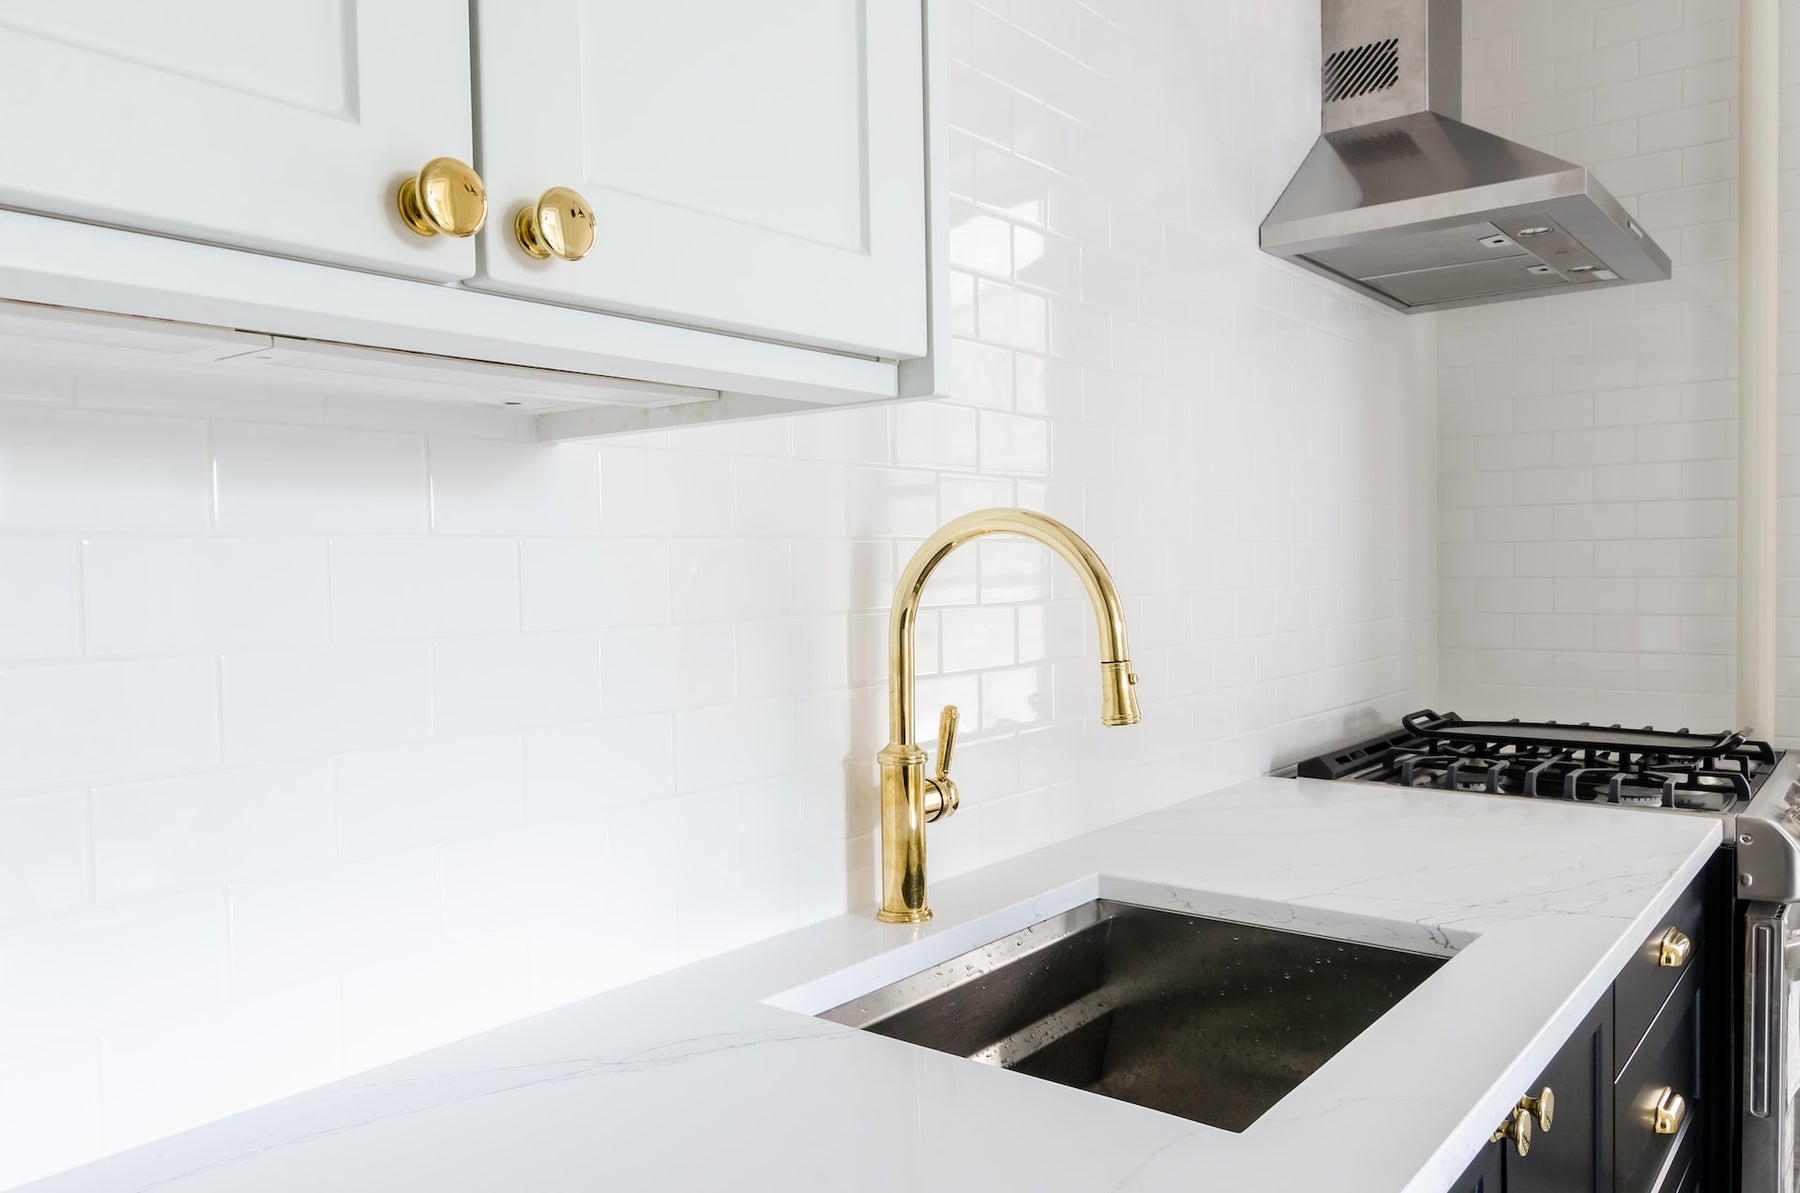 From Drab to Fab: Budget-Friendly Kitchen Faucet Upgrades" - Share ideas and products that can transform a kitchen space without breaking the bank